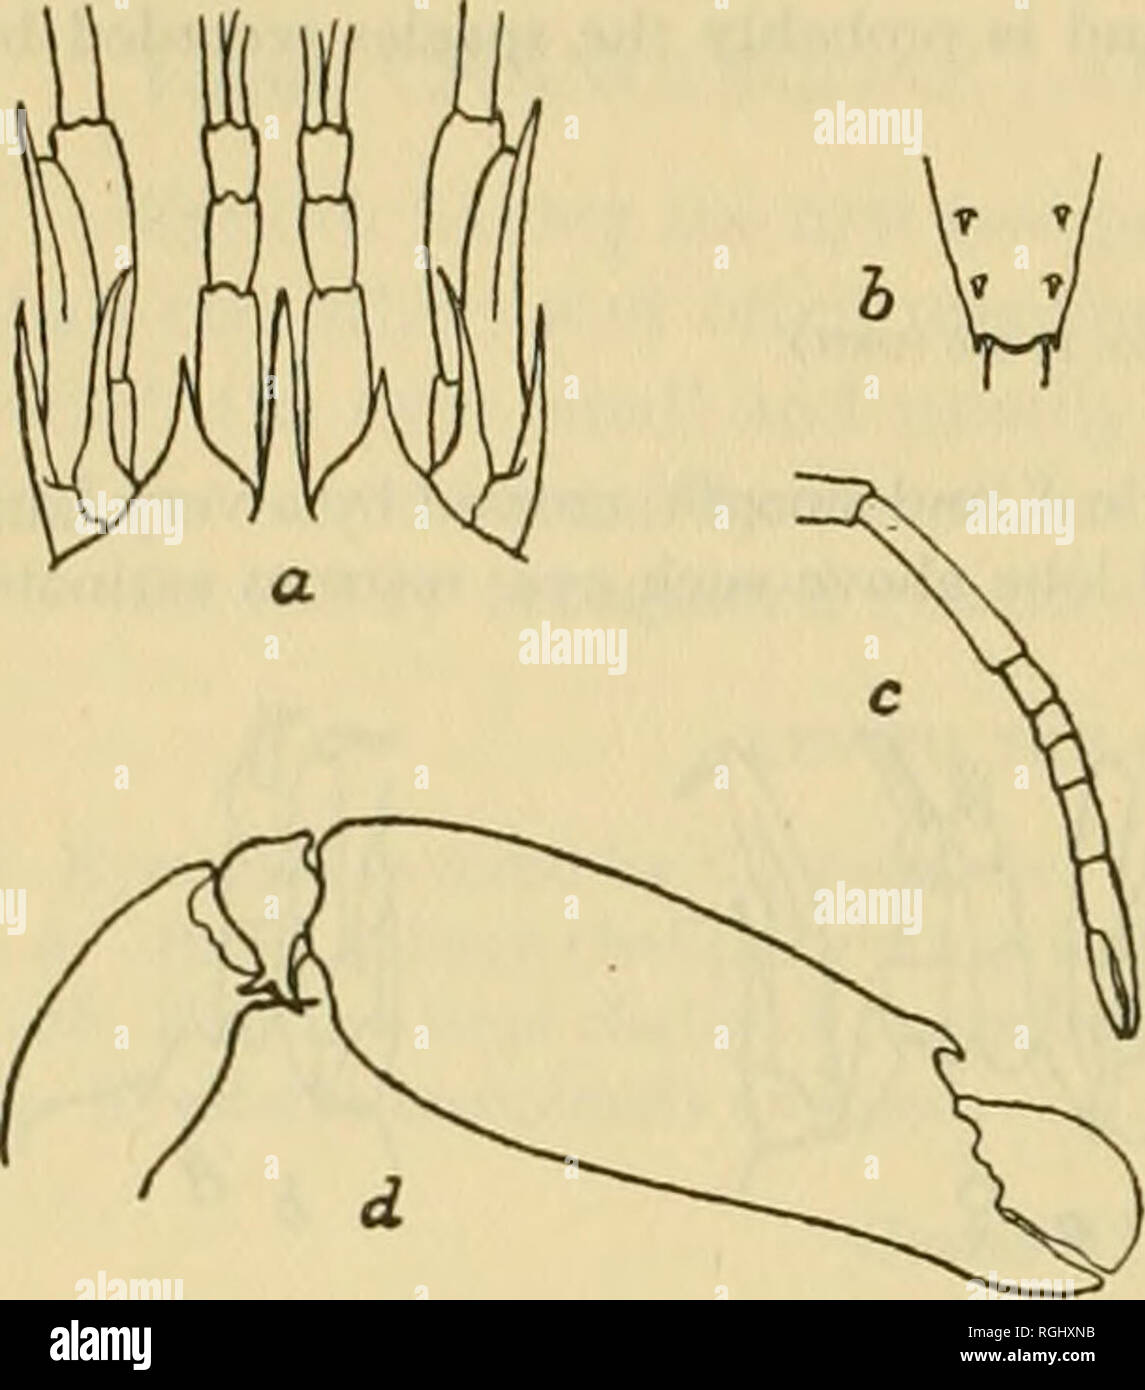 . Bulletin of the Bureau of Fisheries. Fisheries; Fish culture. 384 BULLETIN OF THE BUREAU OP FISHERIES.. Synalpheus townsendi Couti^e. PL xxvi, fig. i. Synalpheus townsendi Coutifere, 1909, p. 32. Similar in form to S. longicarpus but with a much slenderer rostrum which considerably exceeds the supra-orbital lobes and reaches slightly beyond the distal end of the basal article of the antennule. The sides of the telson are not as strongly convergent and are slightly produced into little angles at the distal end and the inner pair of spines are slender and about three times as long as the outer Stock Photo